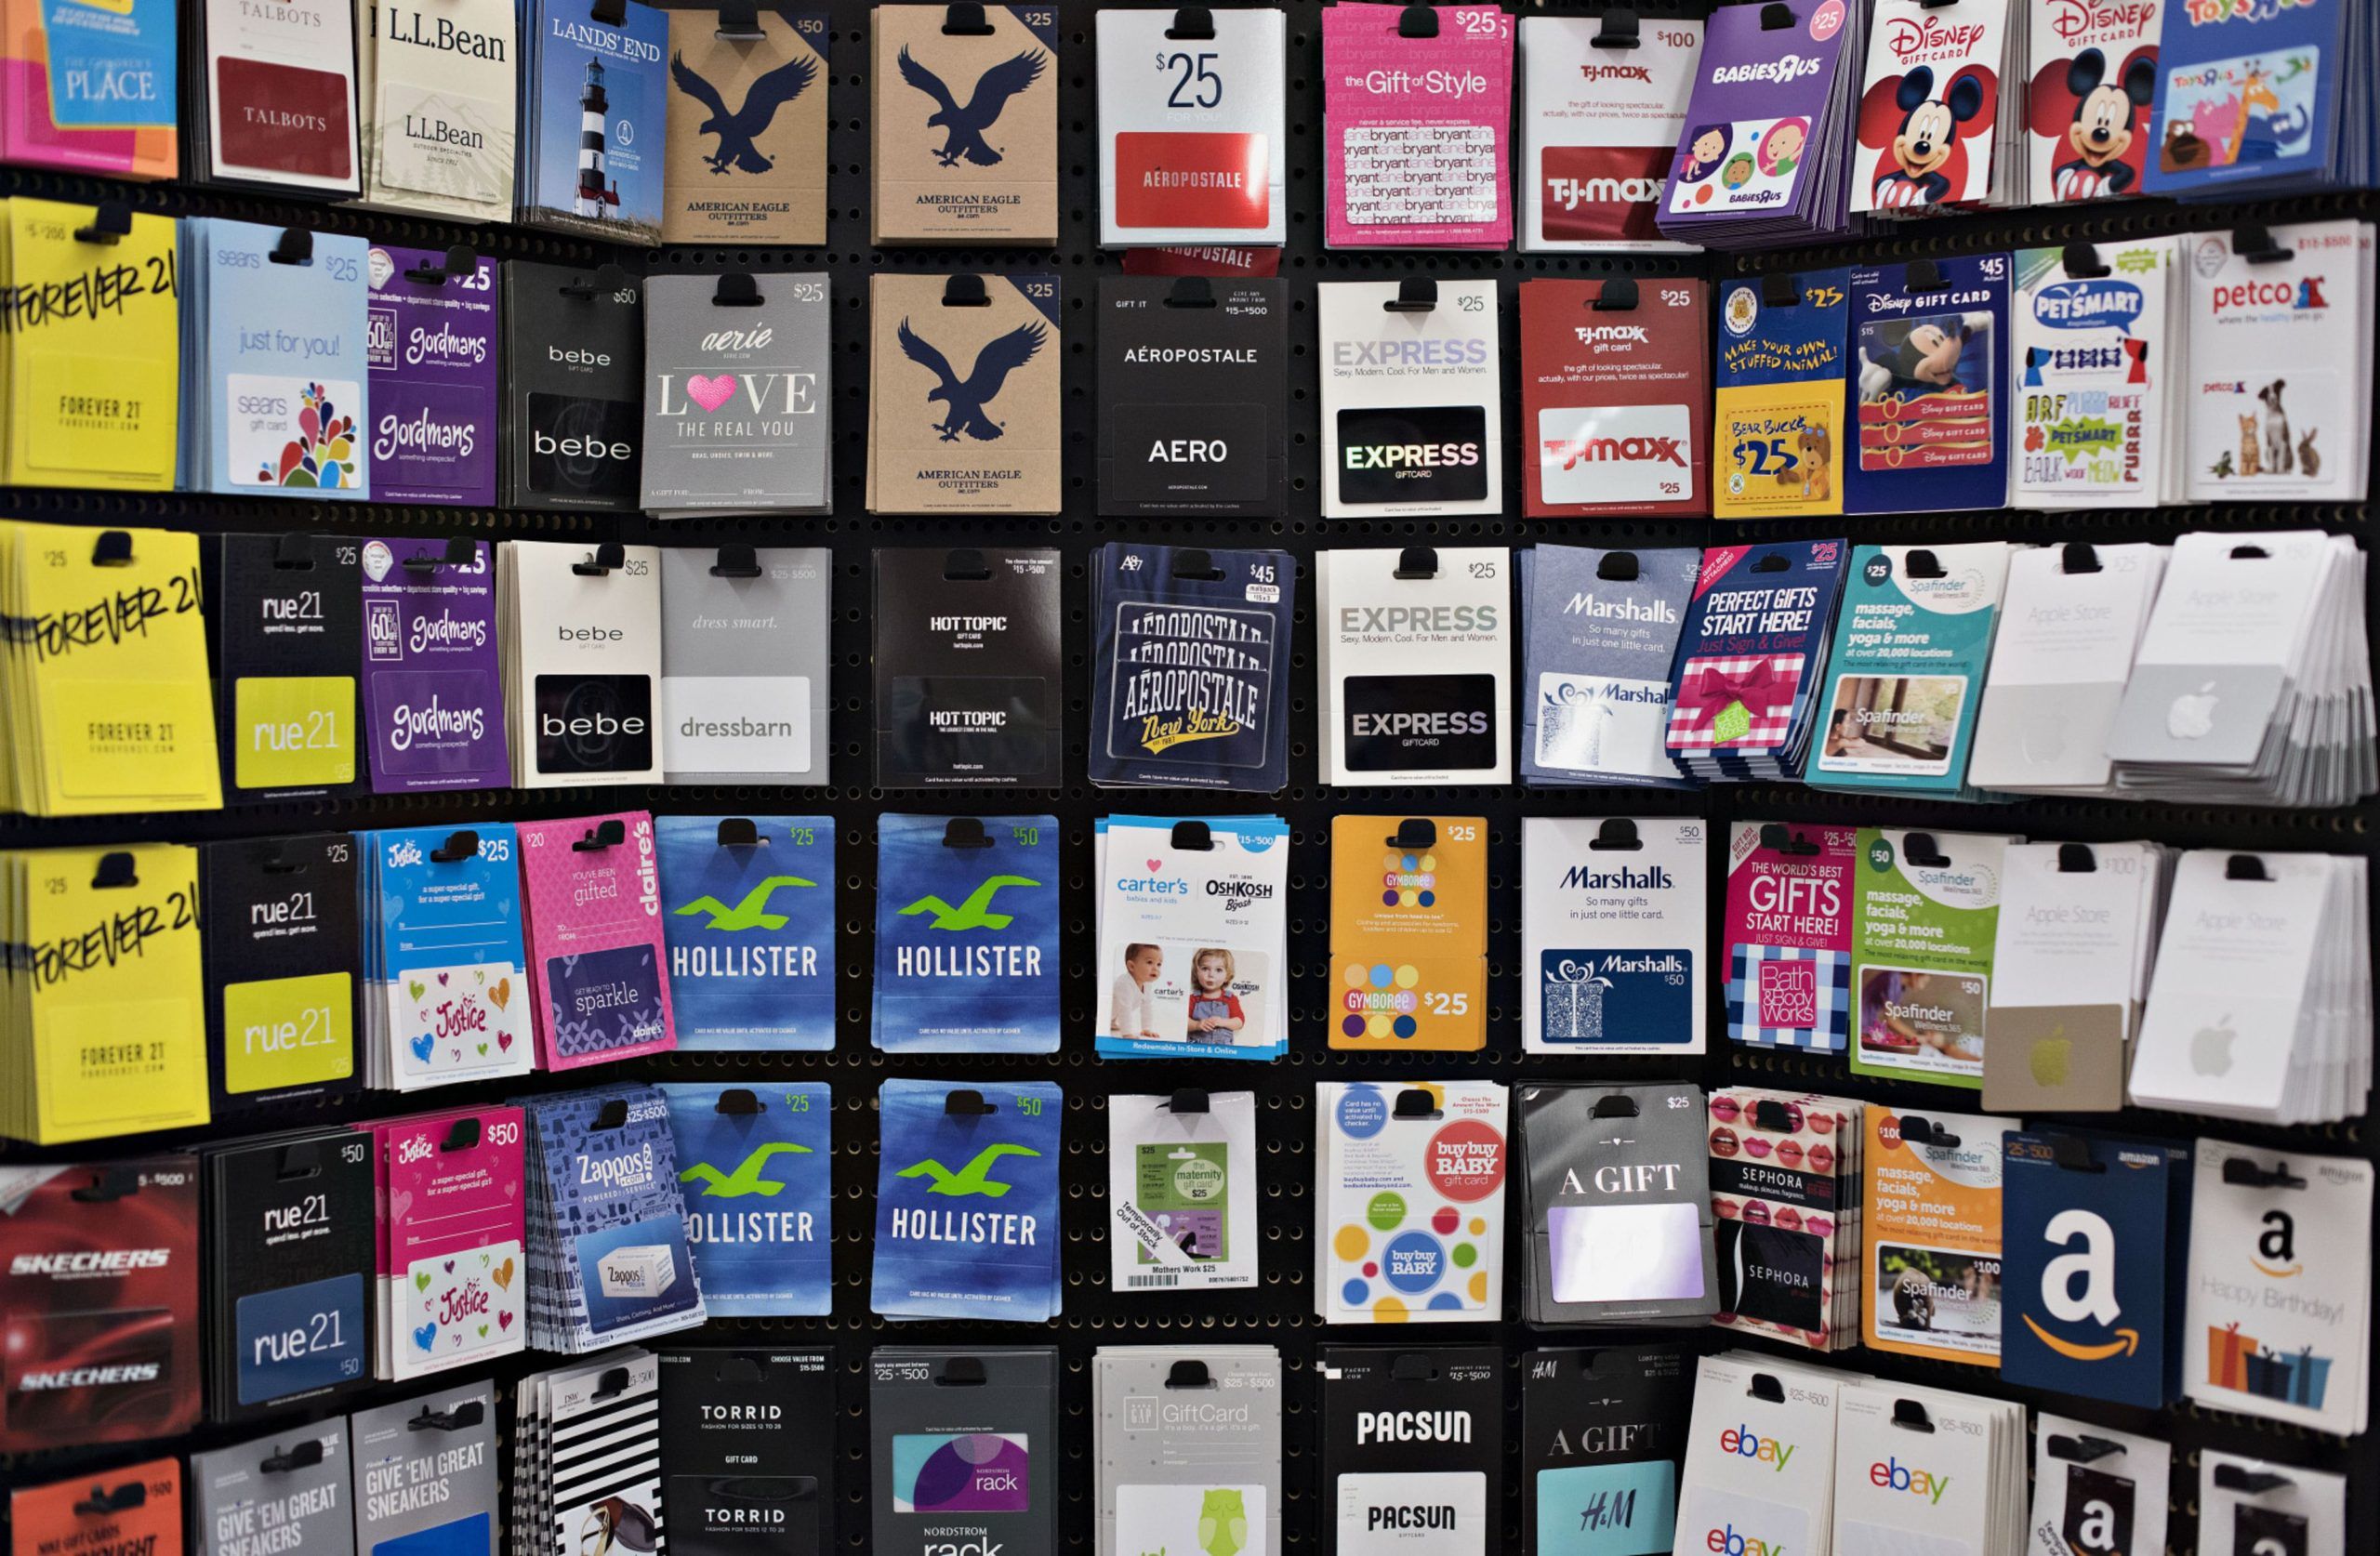 Gift cards are displayed for sale at a Kroger Co. store in Peoria, Illinois, U.S., on Tuesday, June 16, 2015. Kroger Co. is expected to release quarterly earnings on June 18. Photographer: Daniel Acker/Bloomberg